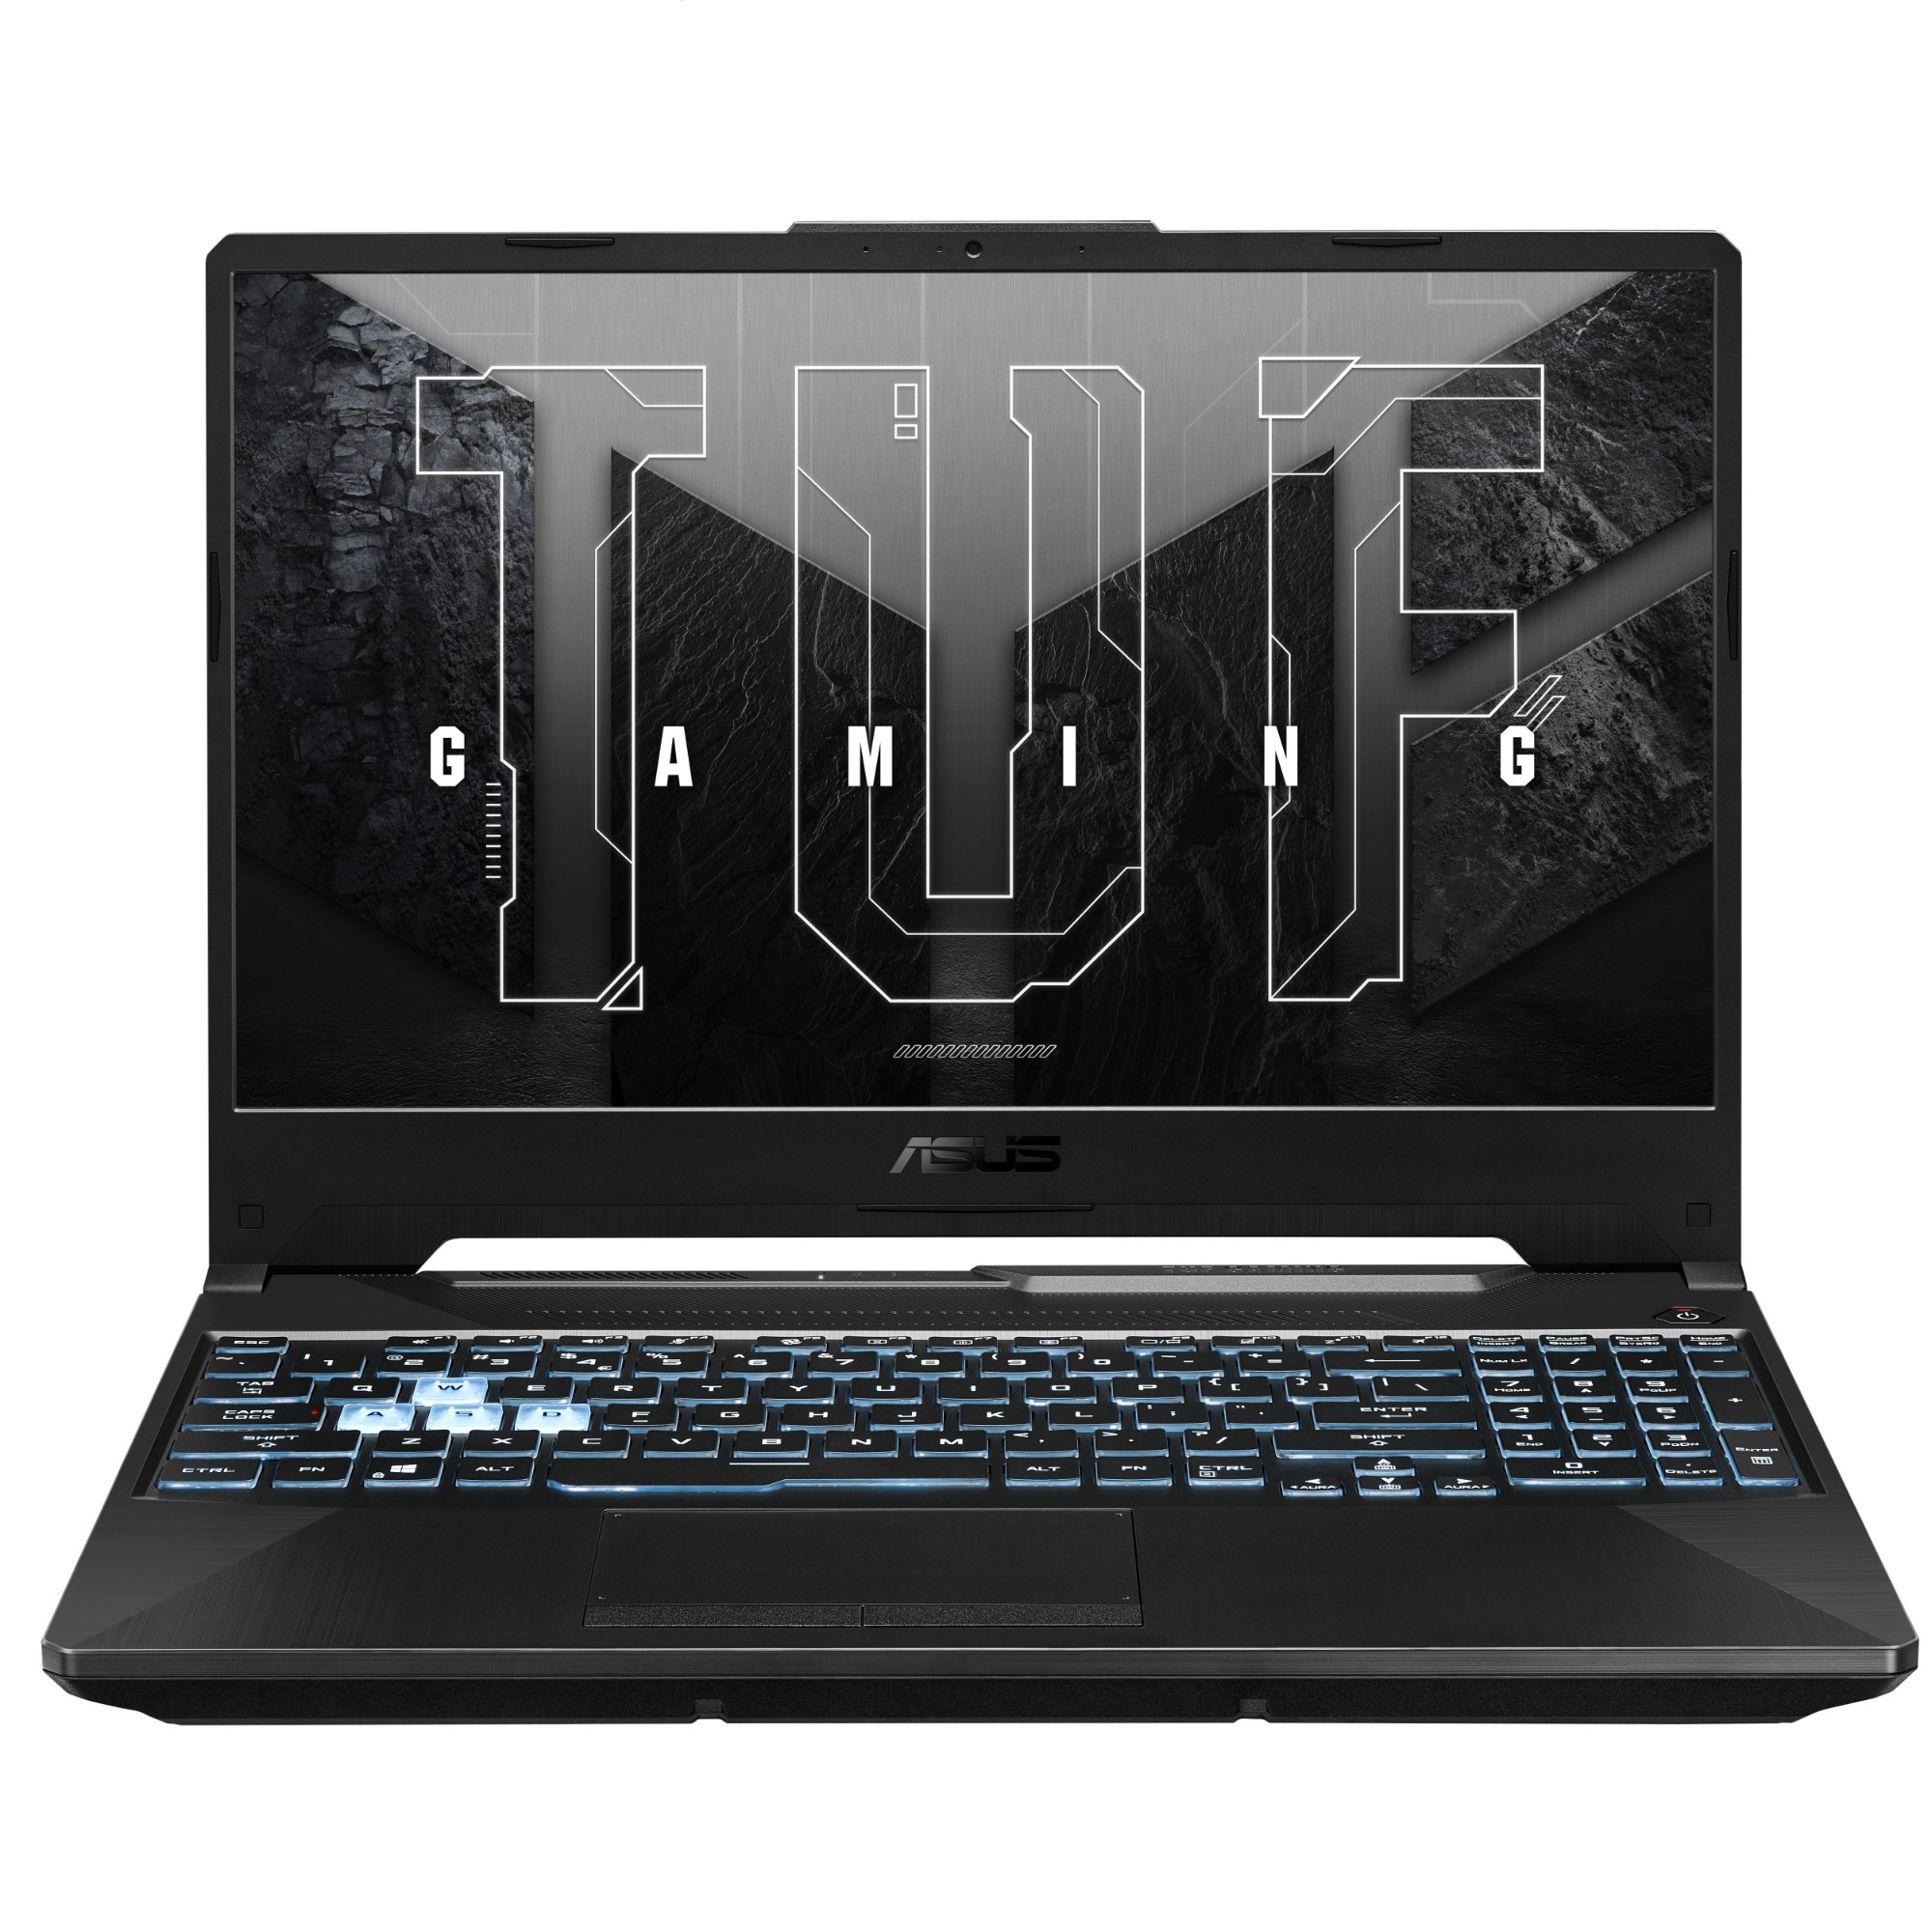 FA506NF-HN003W ASUS TUF Gaming A15 FA506NF-HN003W - AMD Ryzen 5 - 7535HS / up to 4.55 GHz - Win 11 Home - GF RTX 2050 - 8 GB RAM - 512 GB SSD NVMe - 15.6